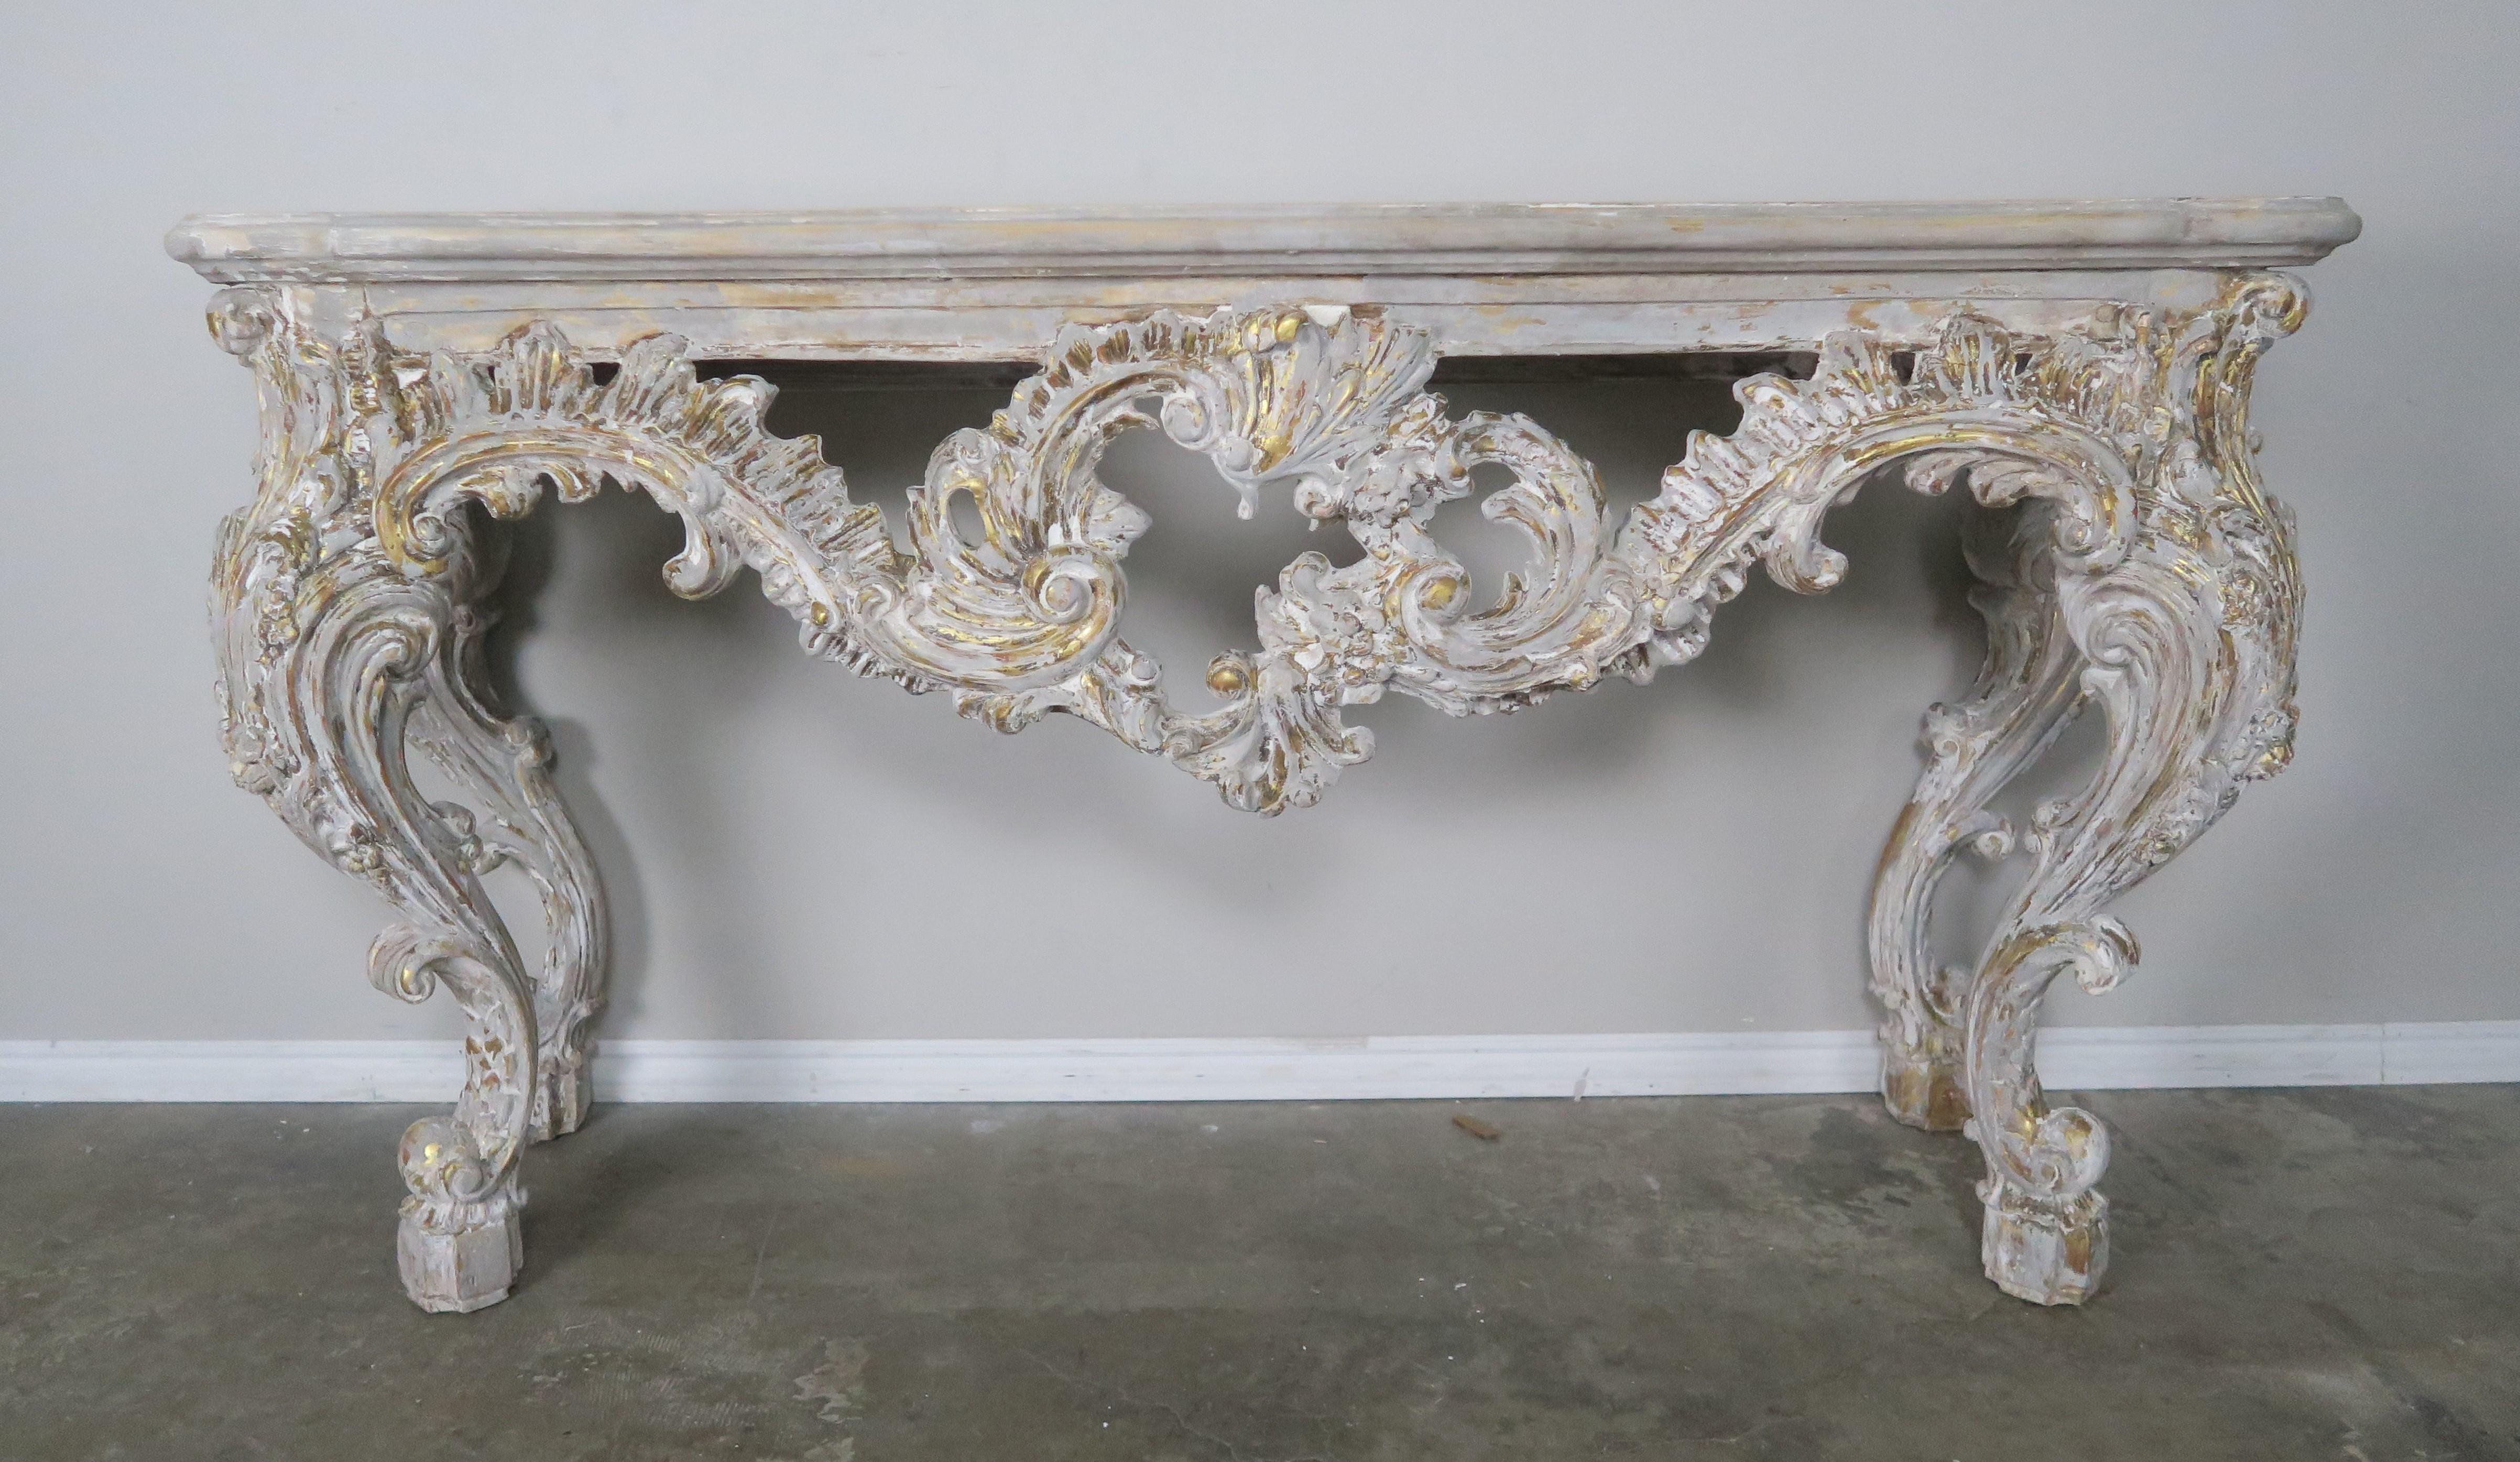 French heavily carved Louis XV style console painted in an antique white coloration with gold gilt highlights throughout. The console stands on four cabriole legs that end in ram's head feet. The console is beautifully carved with swirling acanthus